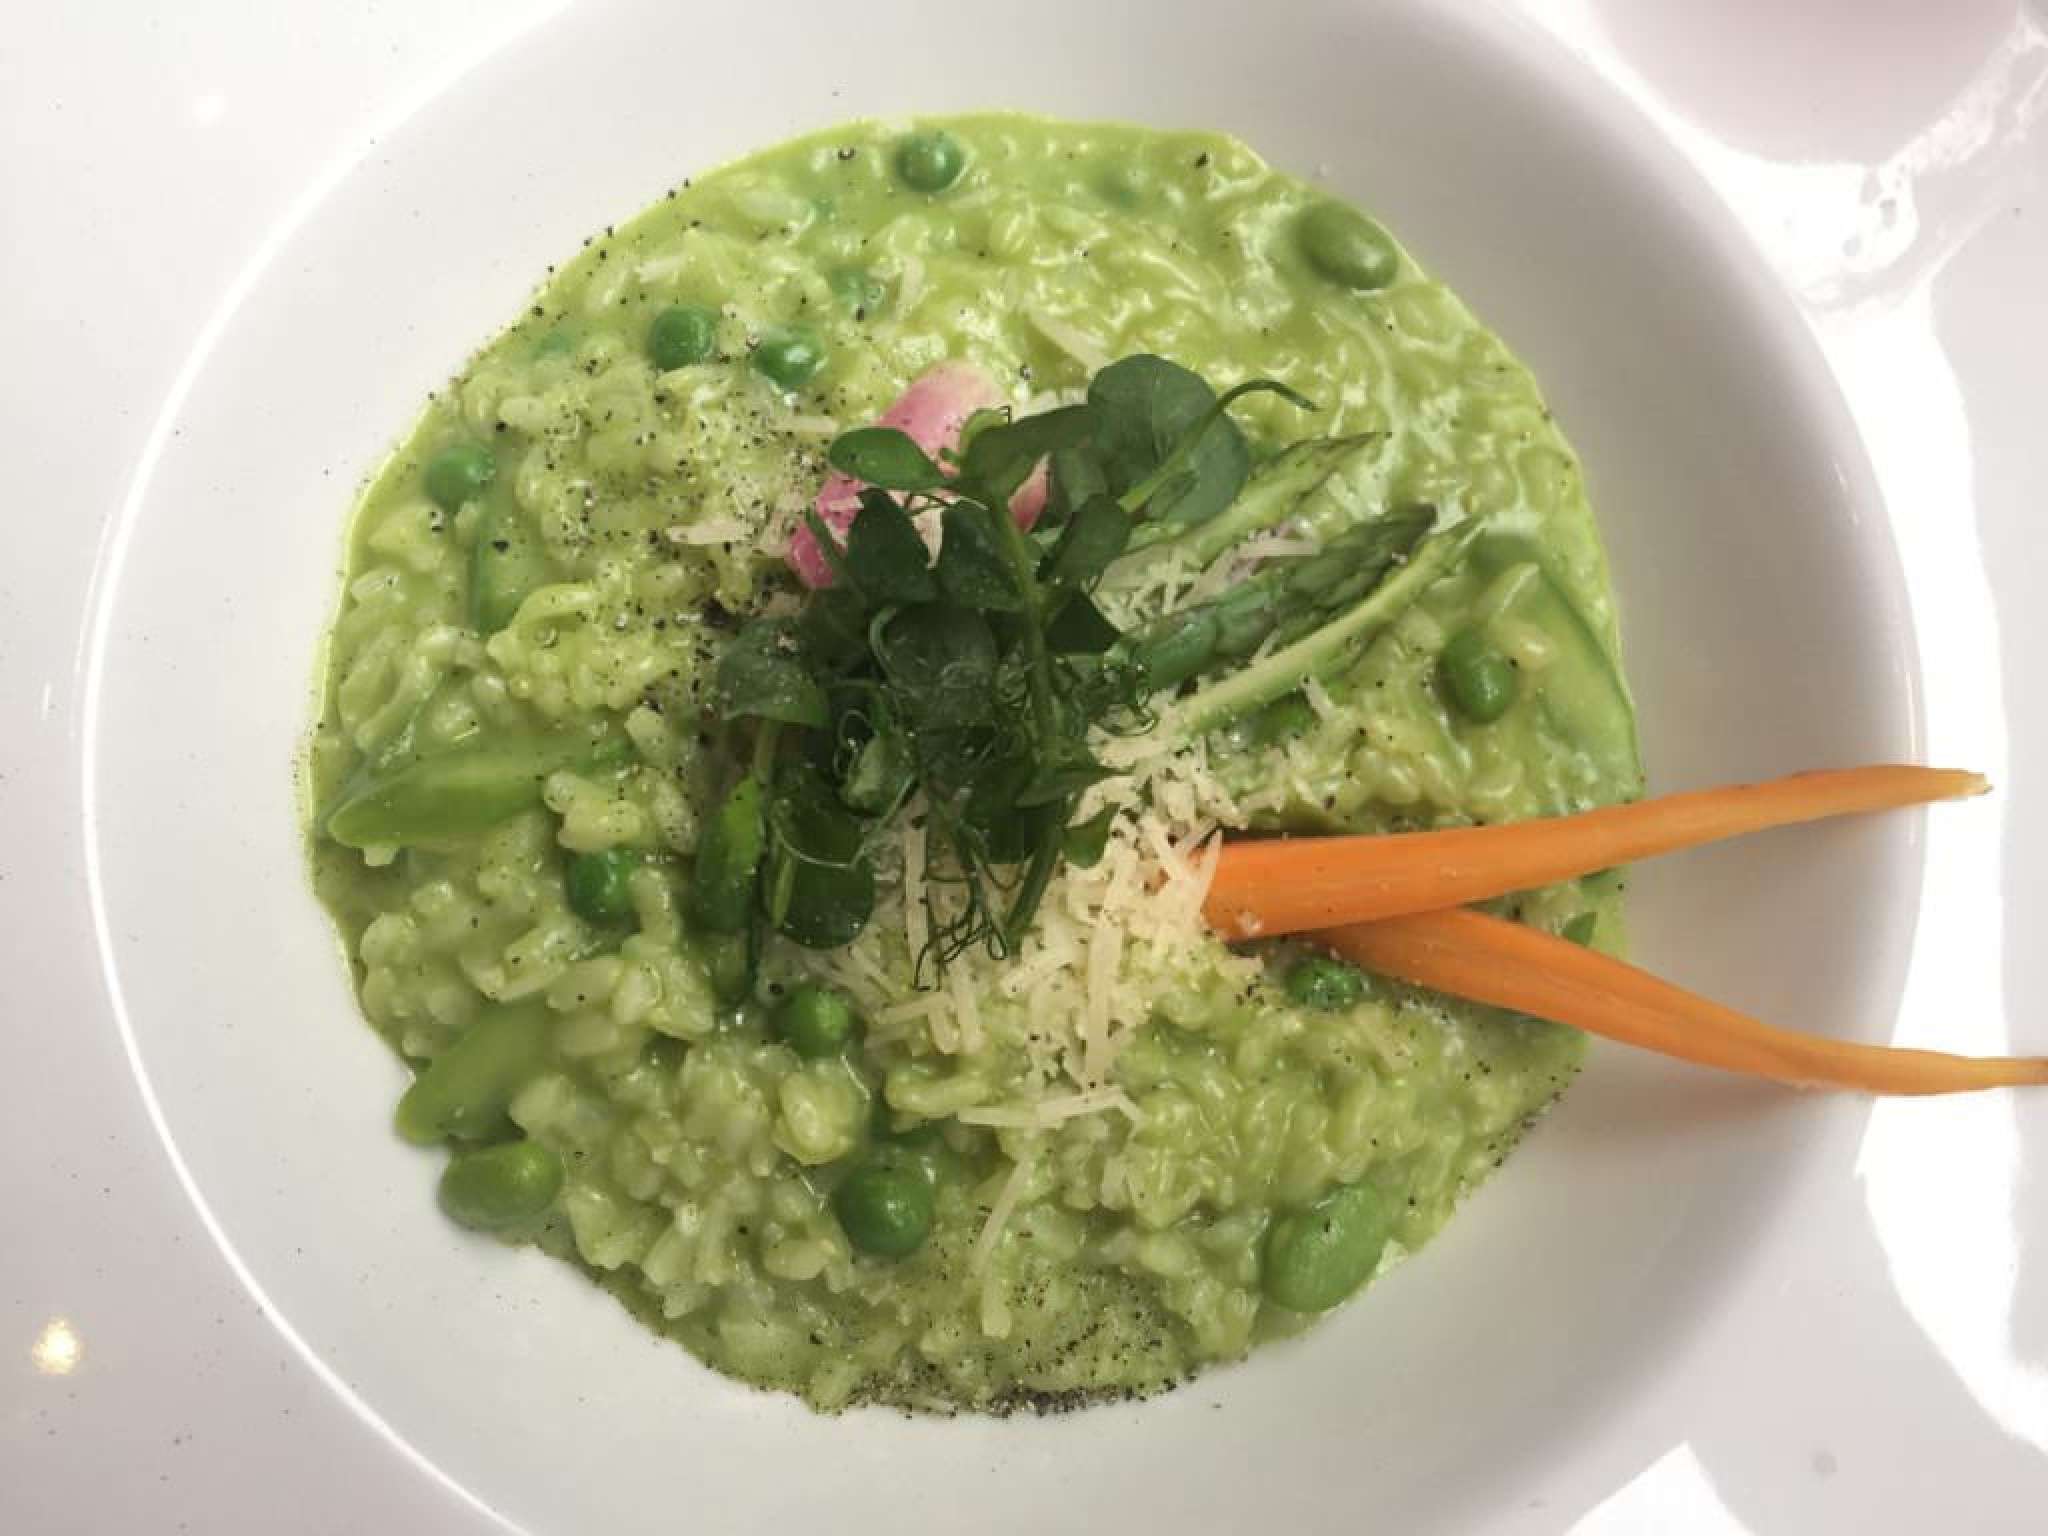 Dalloway Terrace: Modern British Cuisine Meets Nordic Woodland risotto.